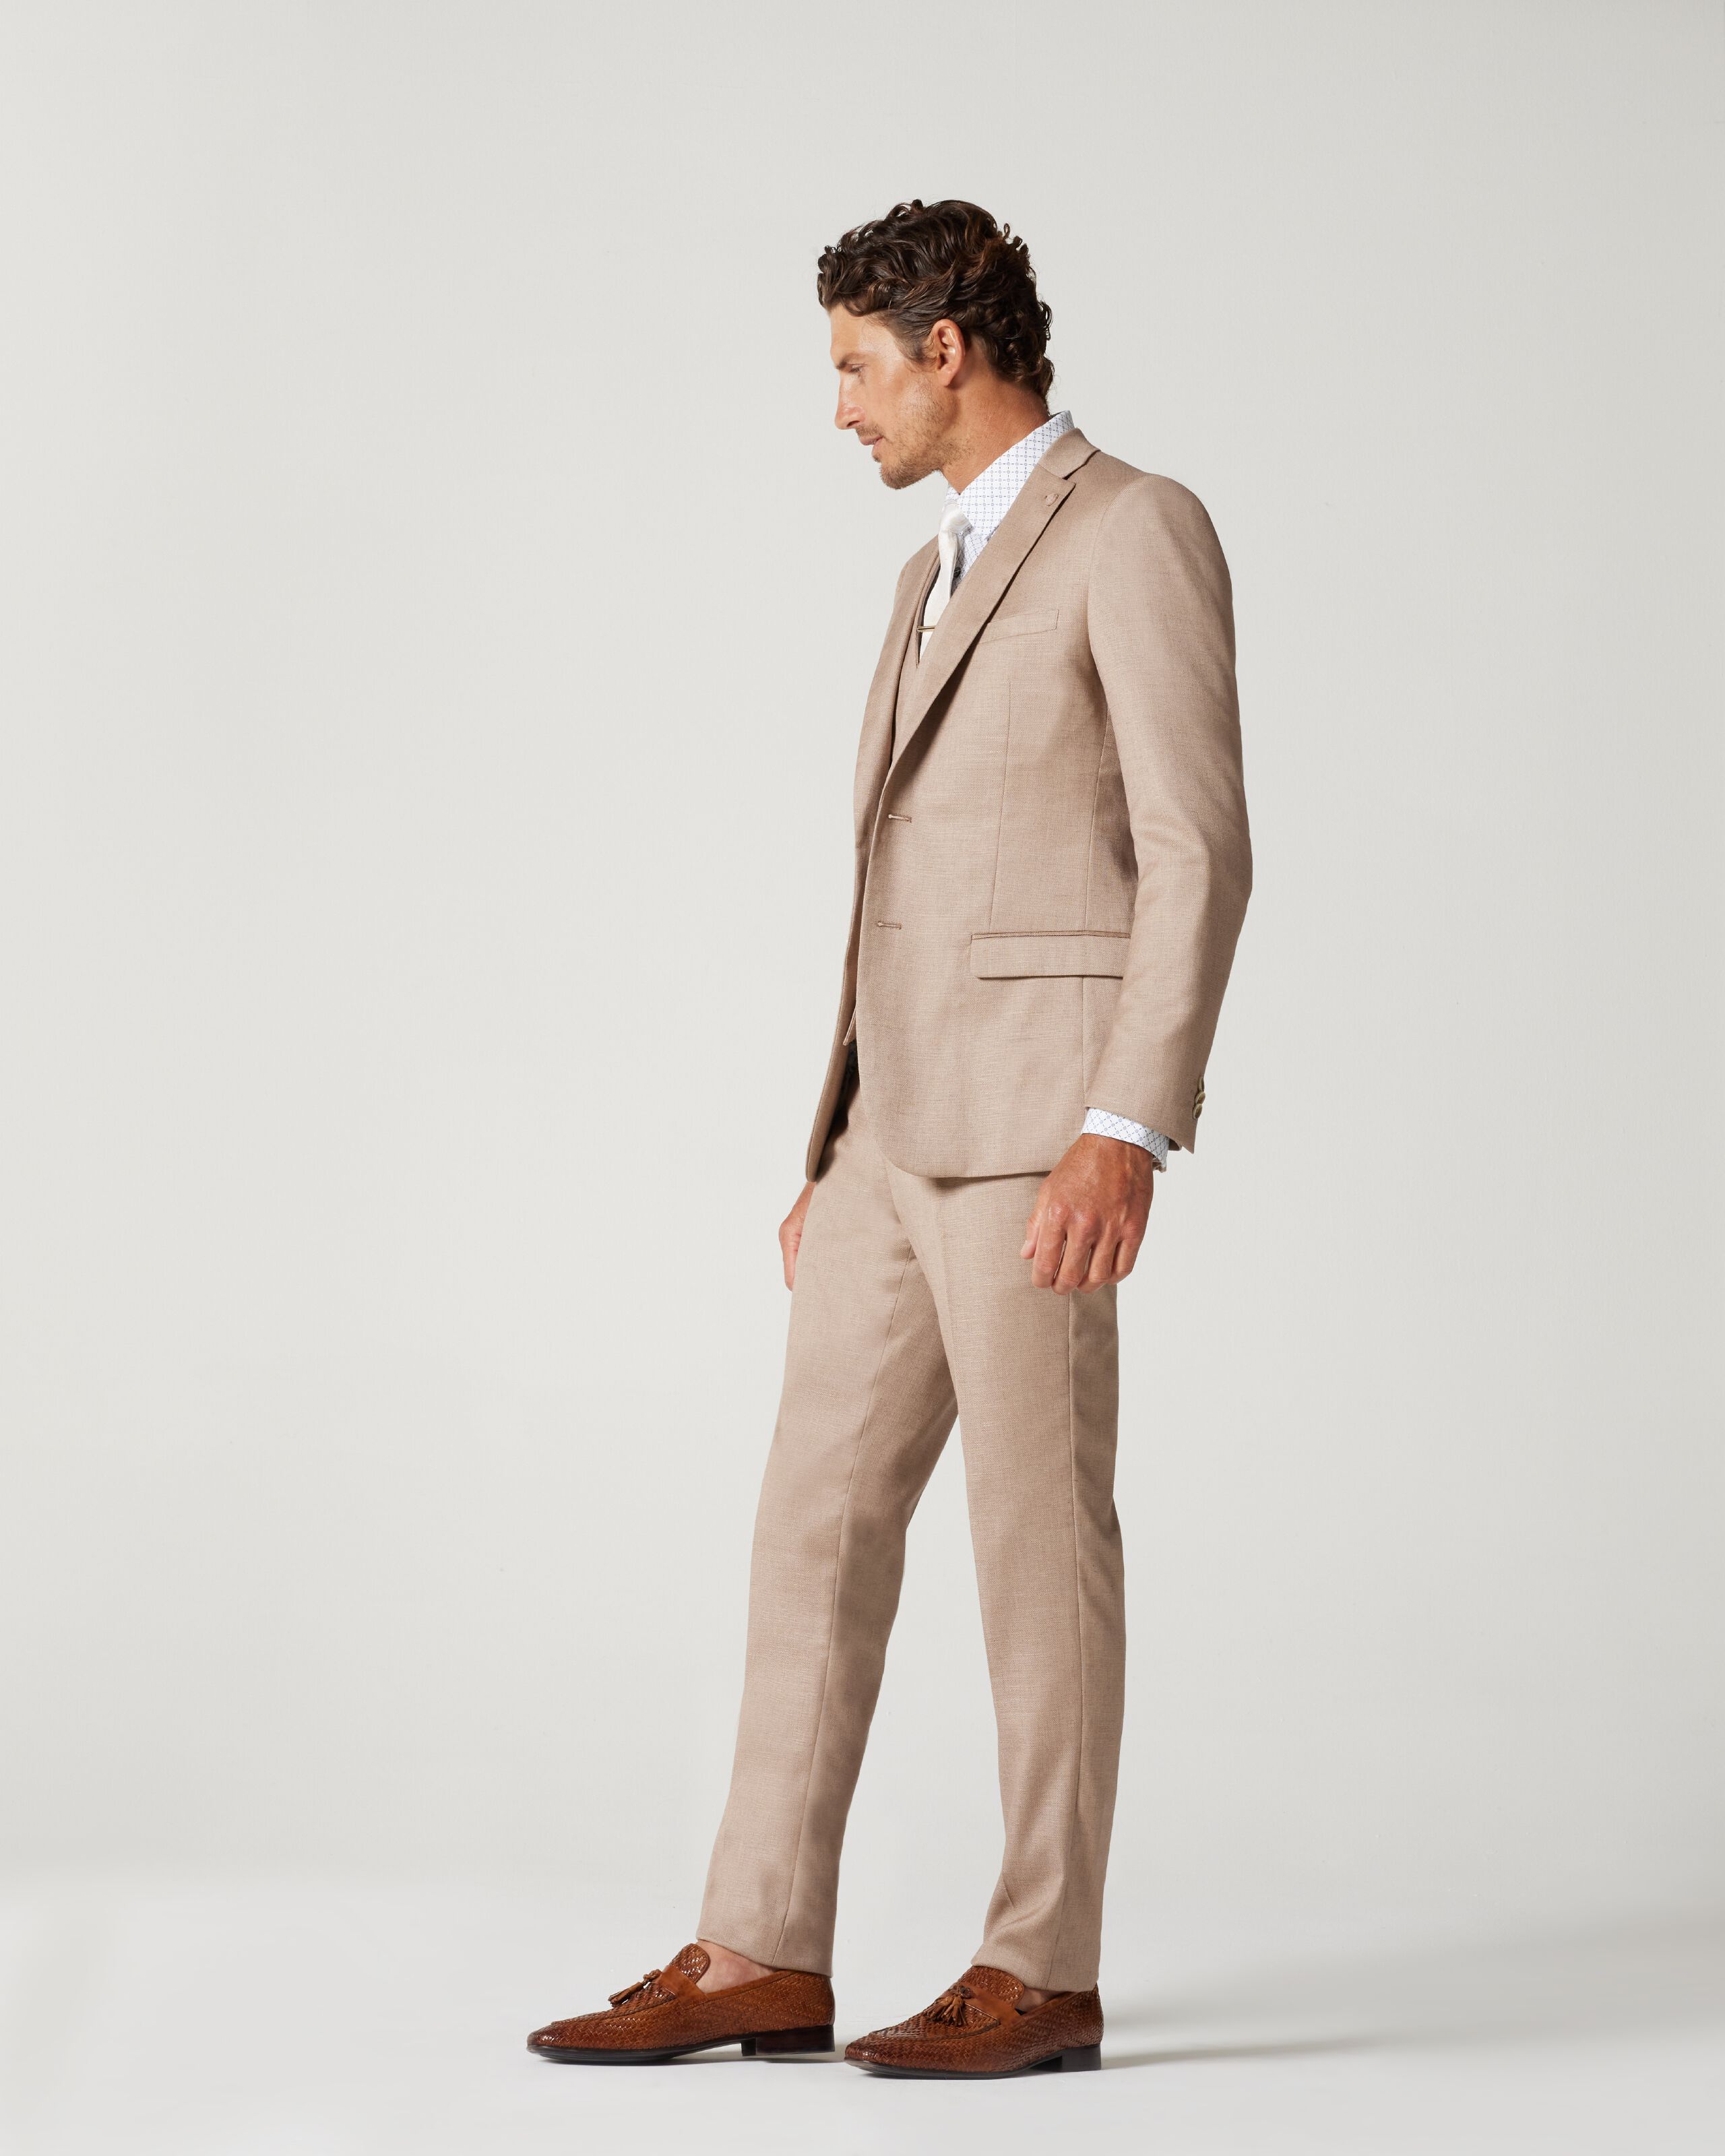 Light coloured wedding suits - Anthony Formal Wear - Anthony Formal Wear